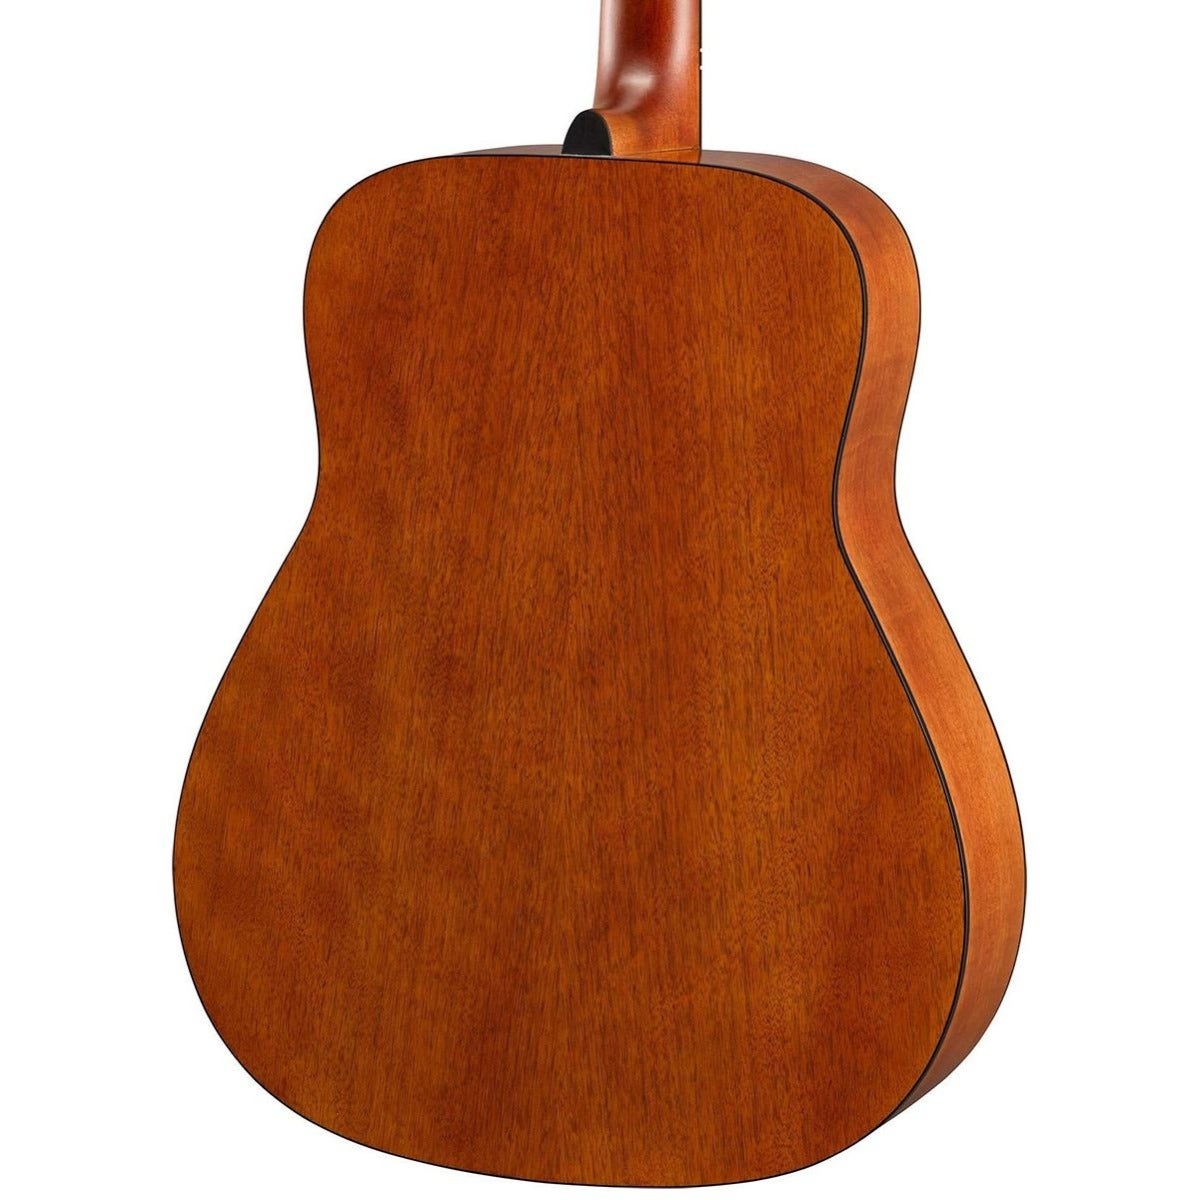 Yamaha FG Series FG800 Acoustic Guitar Dreadnought Top Solid Spruce Back Nato, Okoume - image 2 of 4